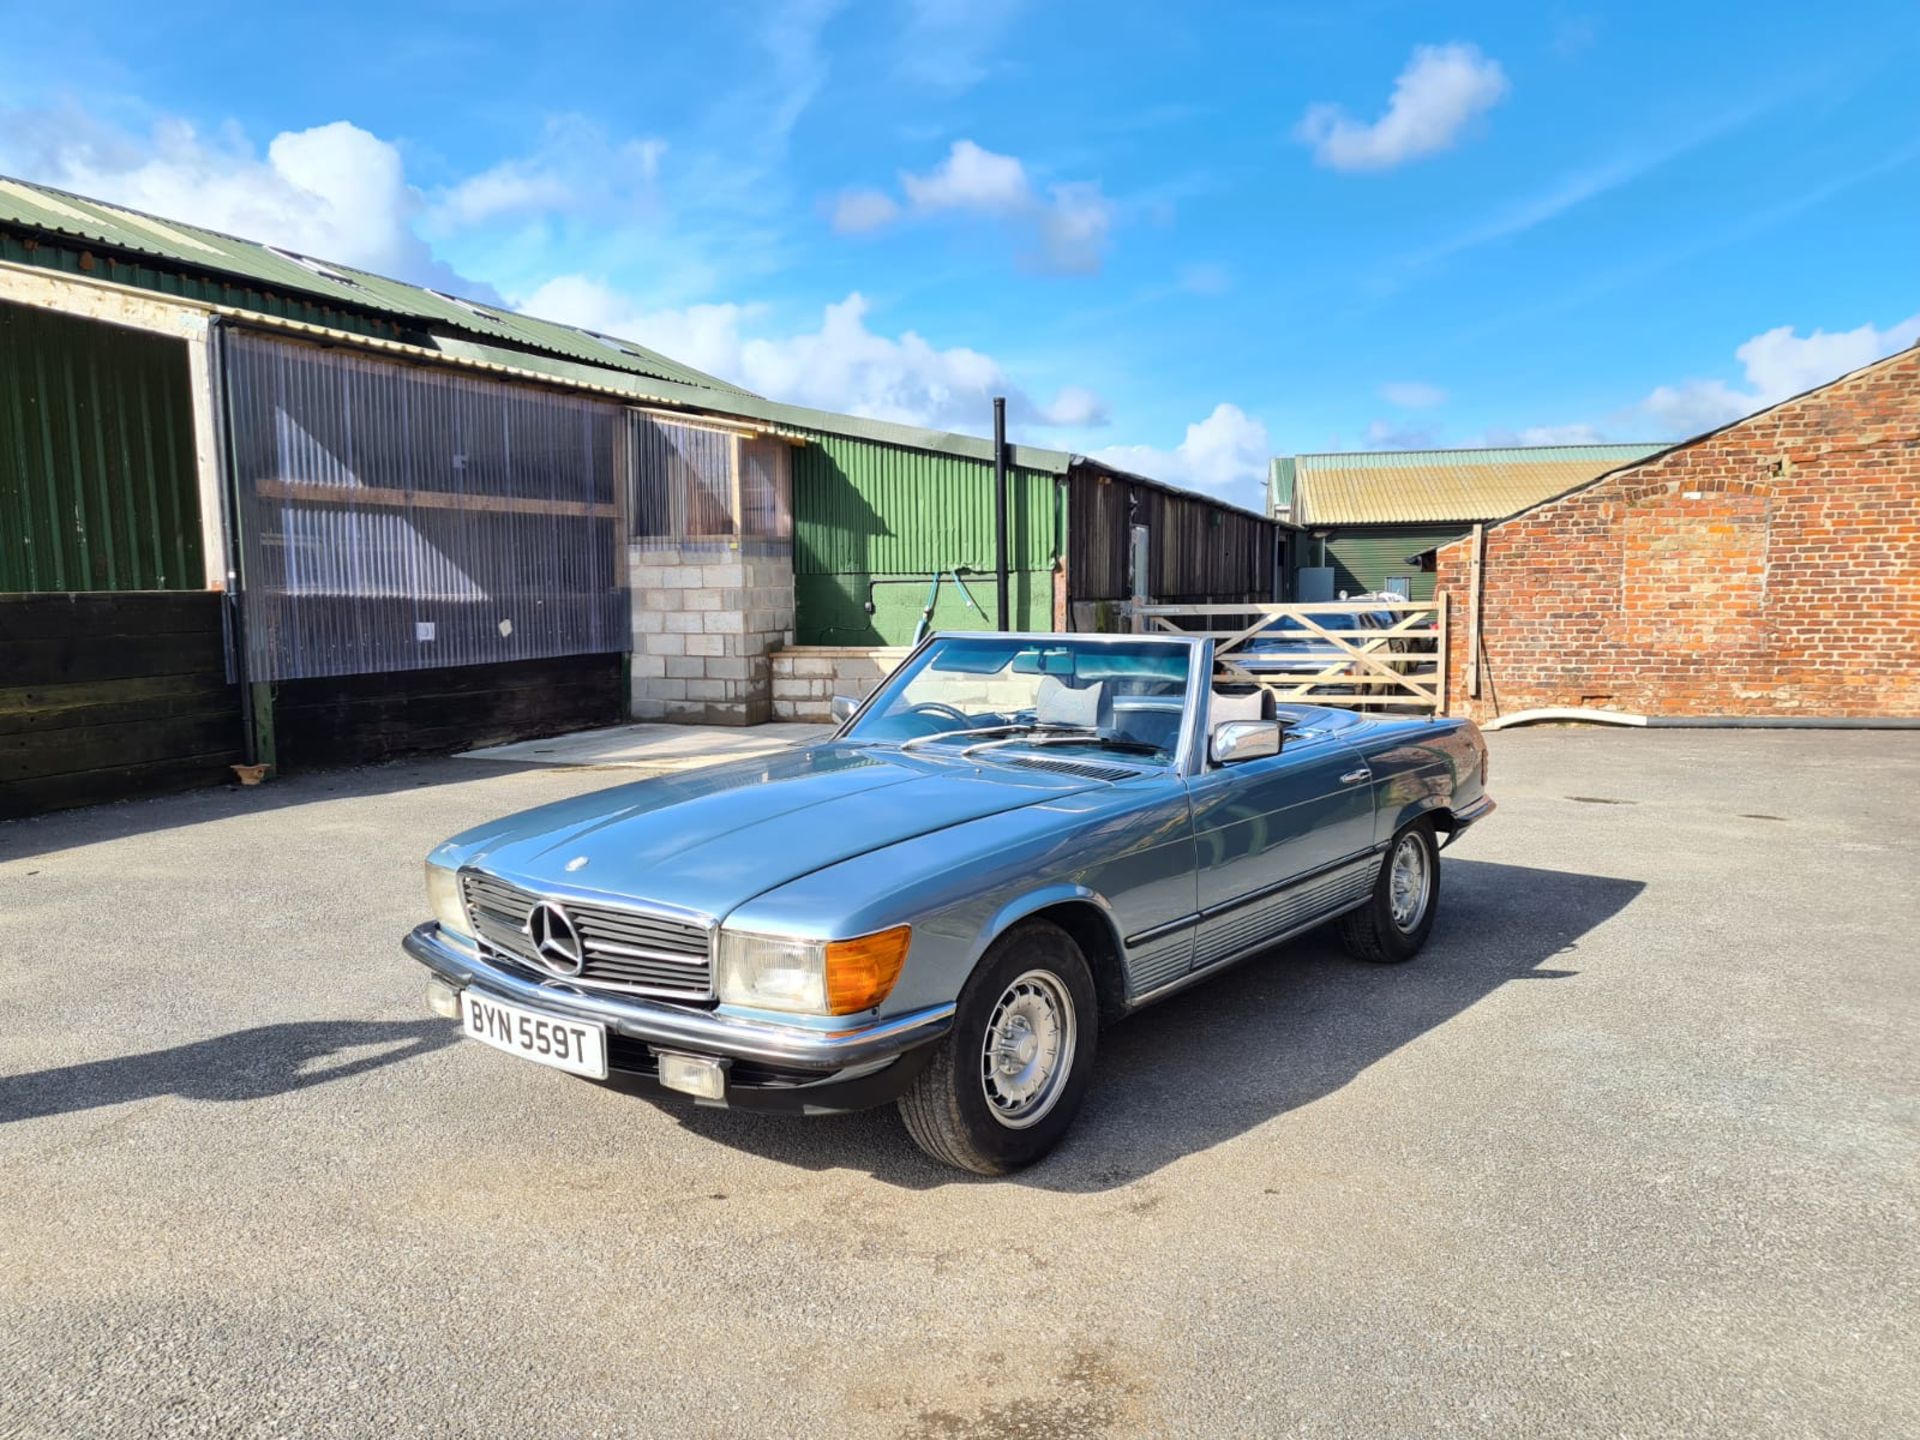 Stunning 1979 Mercedes Benz SL350 V8 With Factory Hardtop - Restored in 2018 - Image 9 of 22